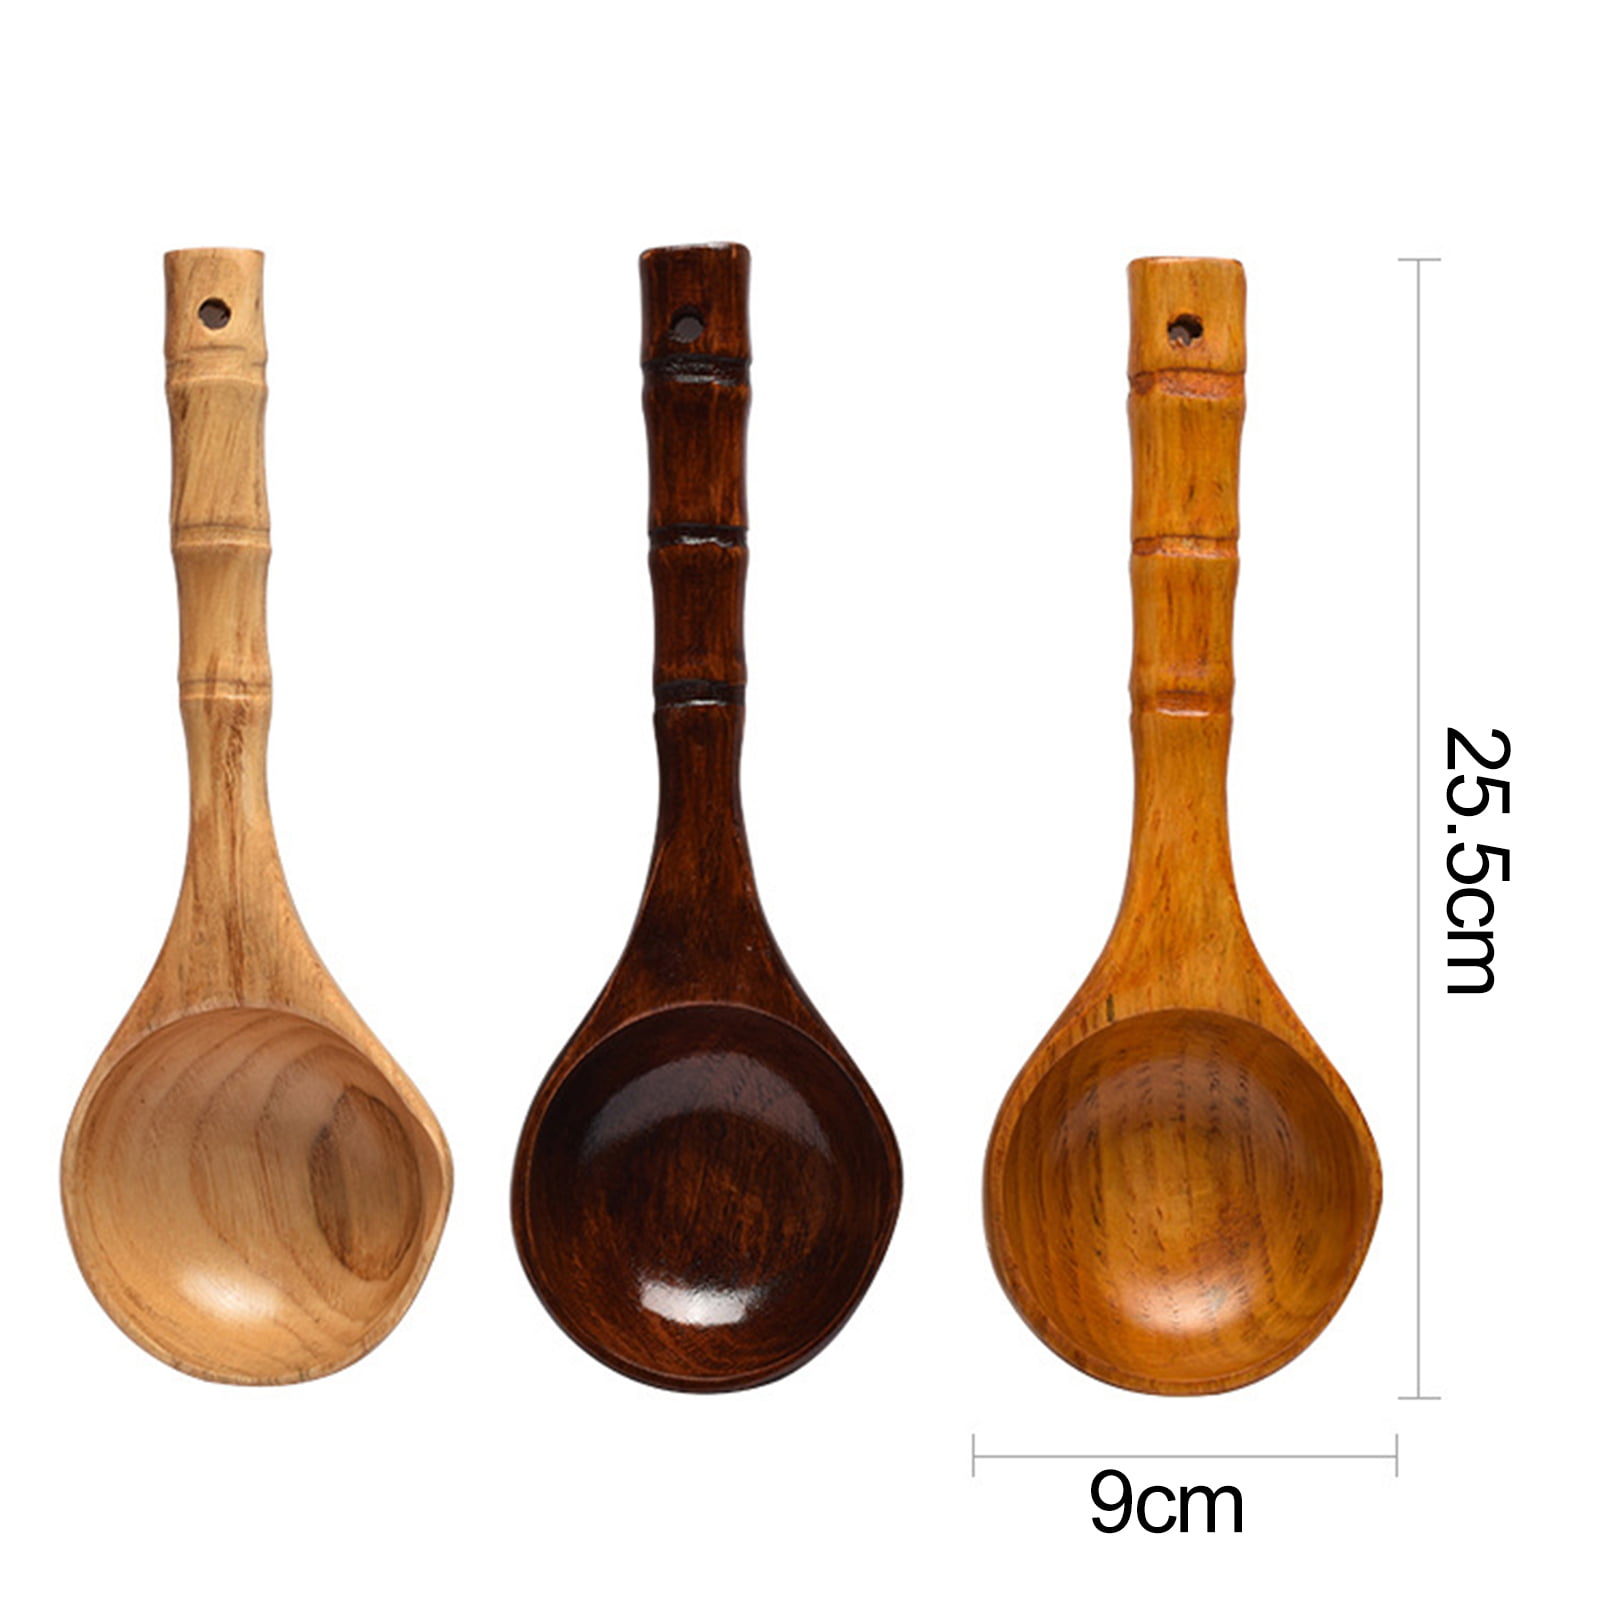 Bamboo tiny spoon/Mini Wooden Spoons for Salt and Spices, 10pcs Carbonized  Brown 3.5